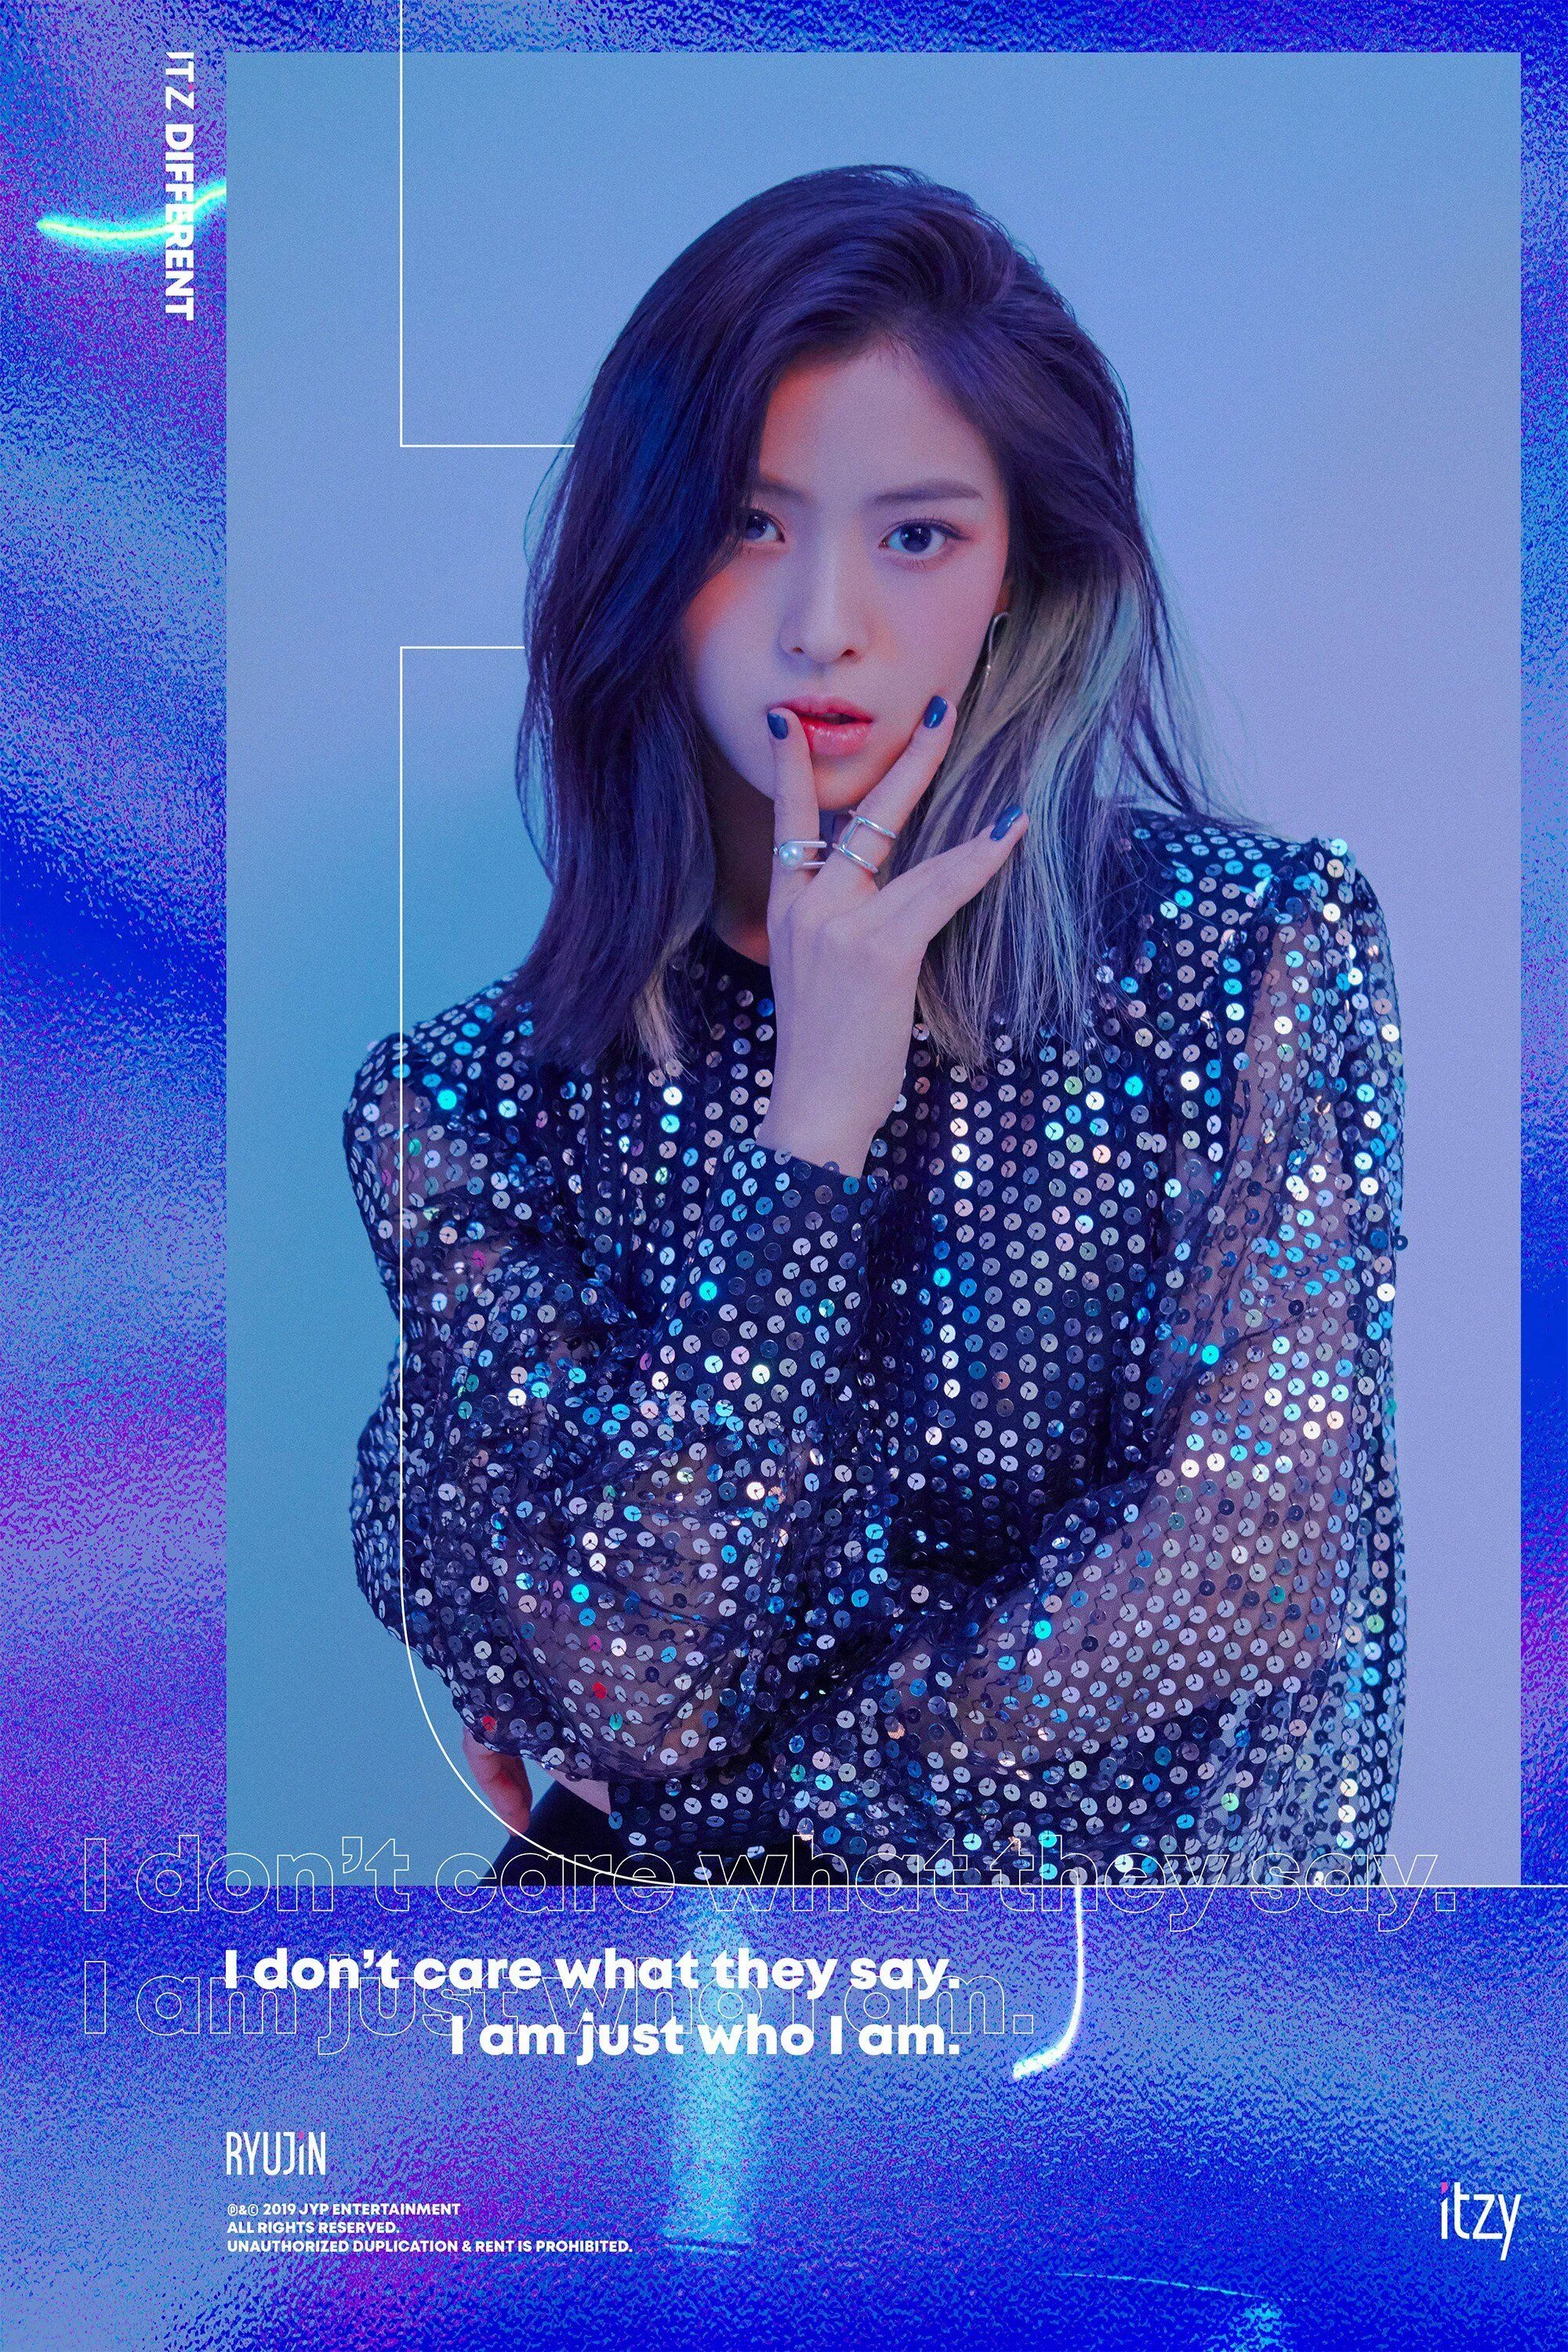 ITZY Checkmate Teaser Photos 2 (HD/HQ) - K-Pop Database /